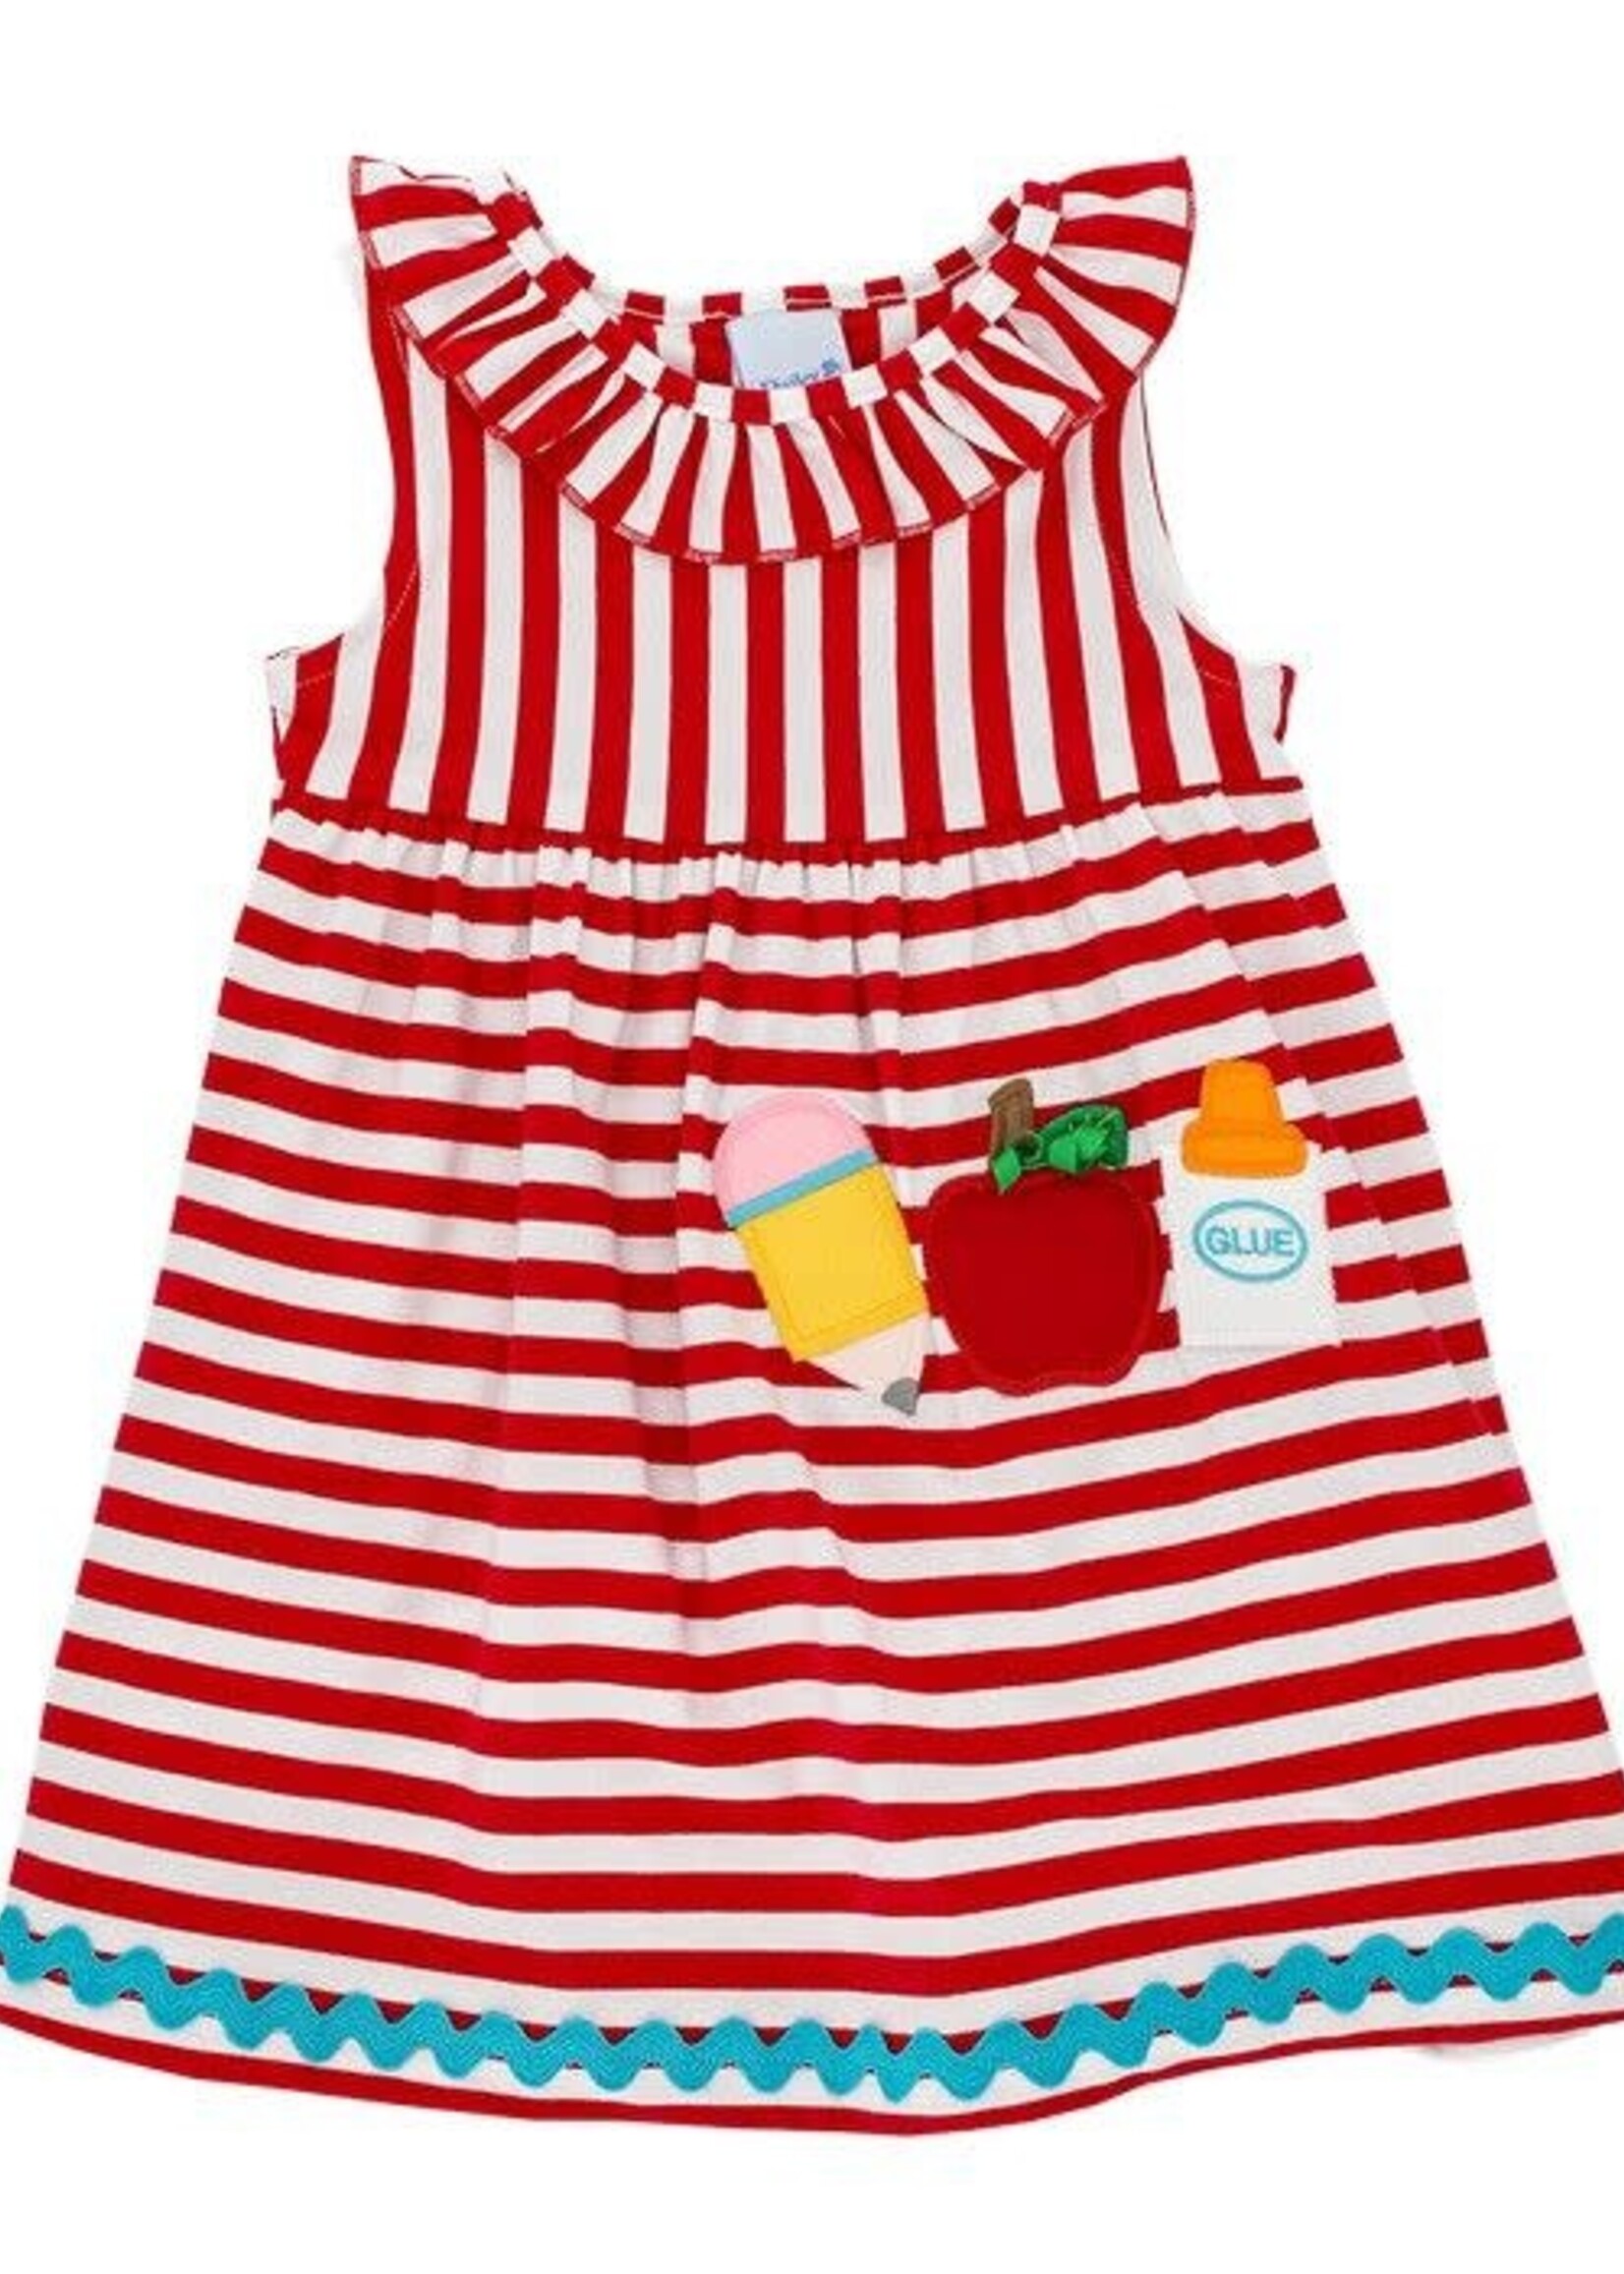 The Bailey Boys Back-to-School Red/White Stripe Knit Dress